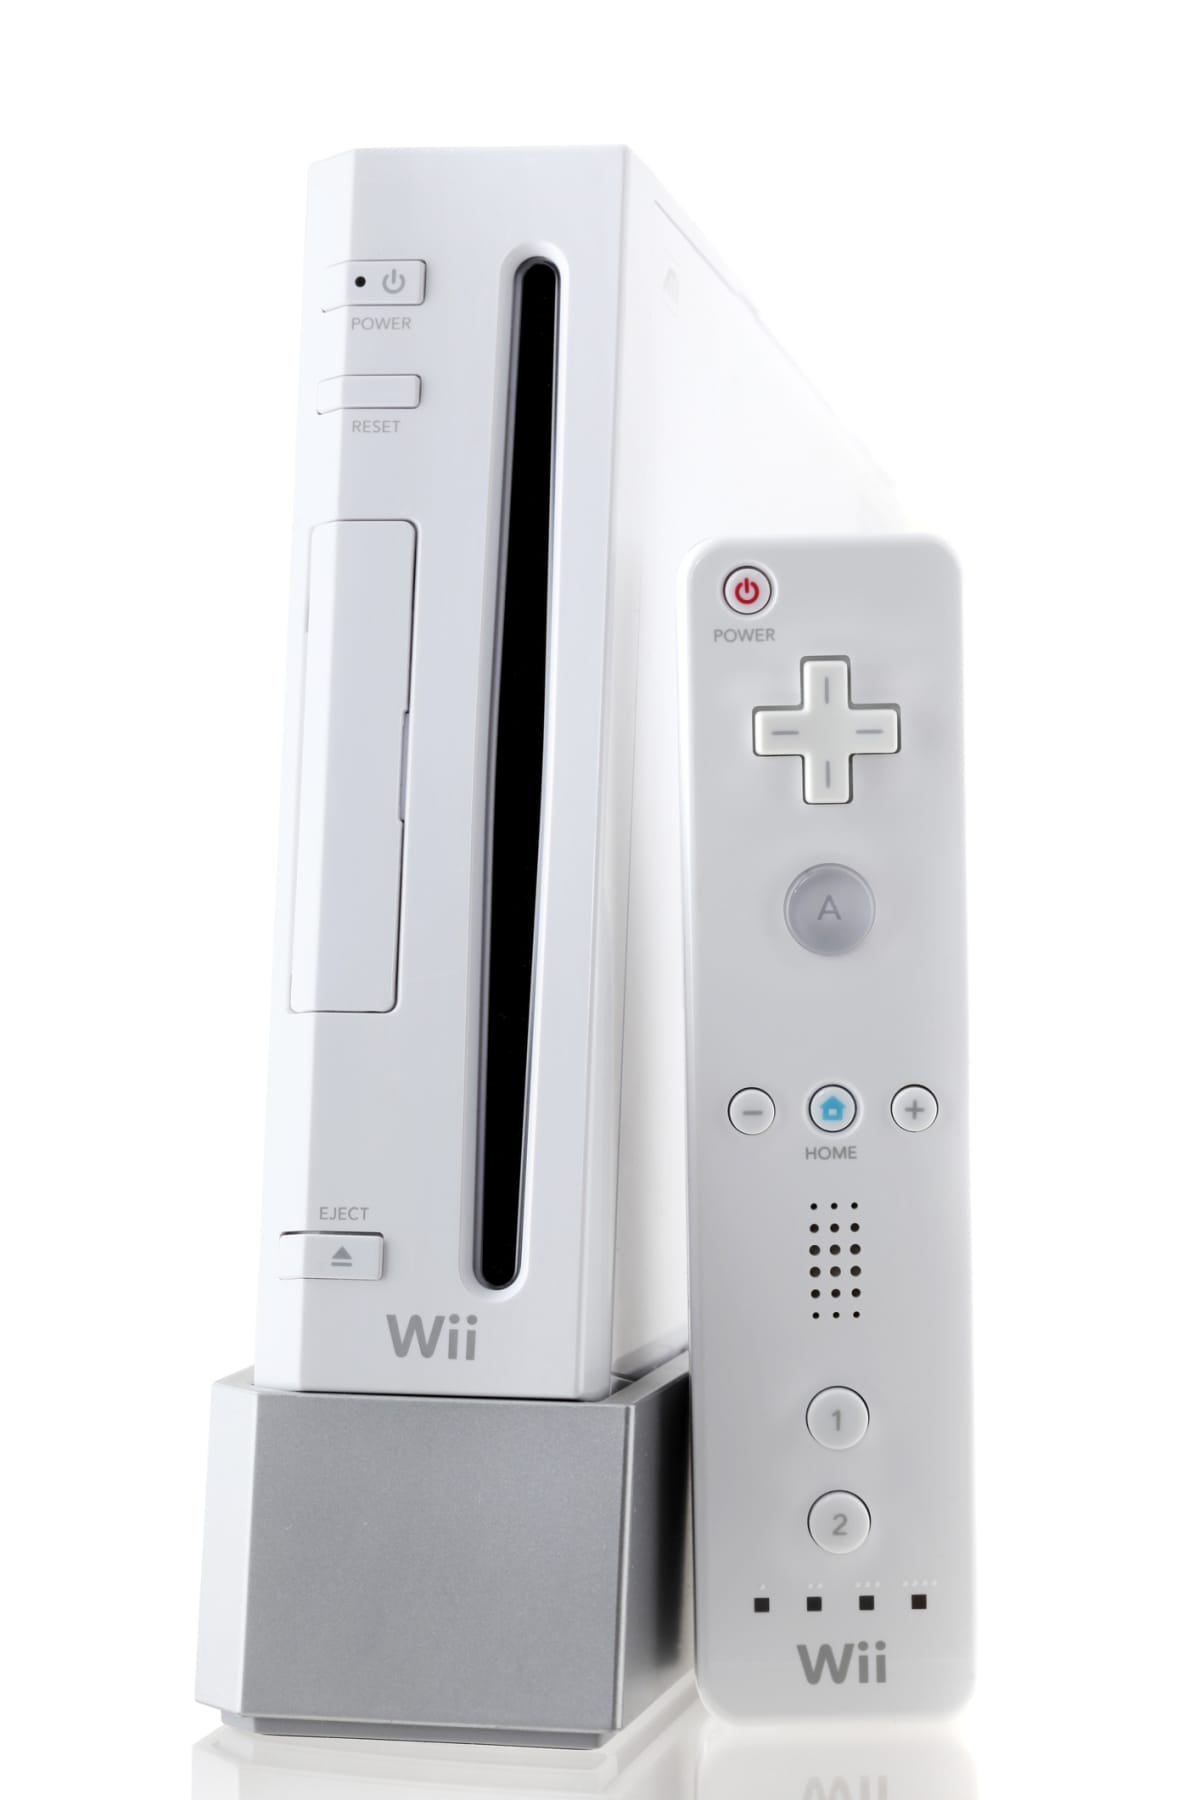 Providence, RI, USA - March 13, 2011: A white Nintendo Wii console and WiiMote controller made by Nintendo isolated on a white background on a reflective surface